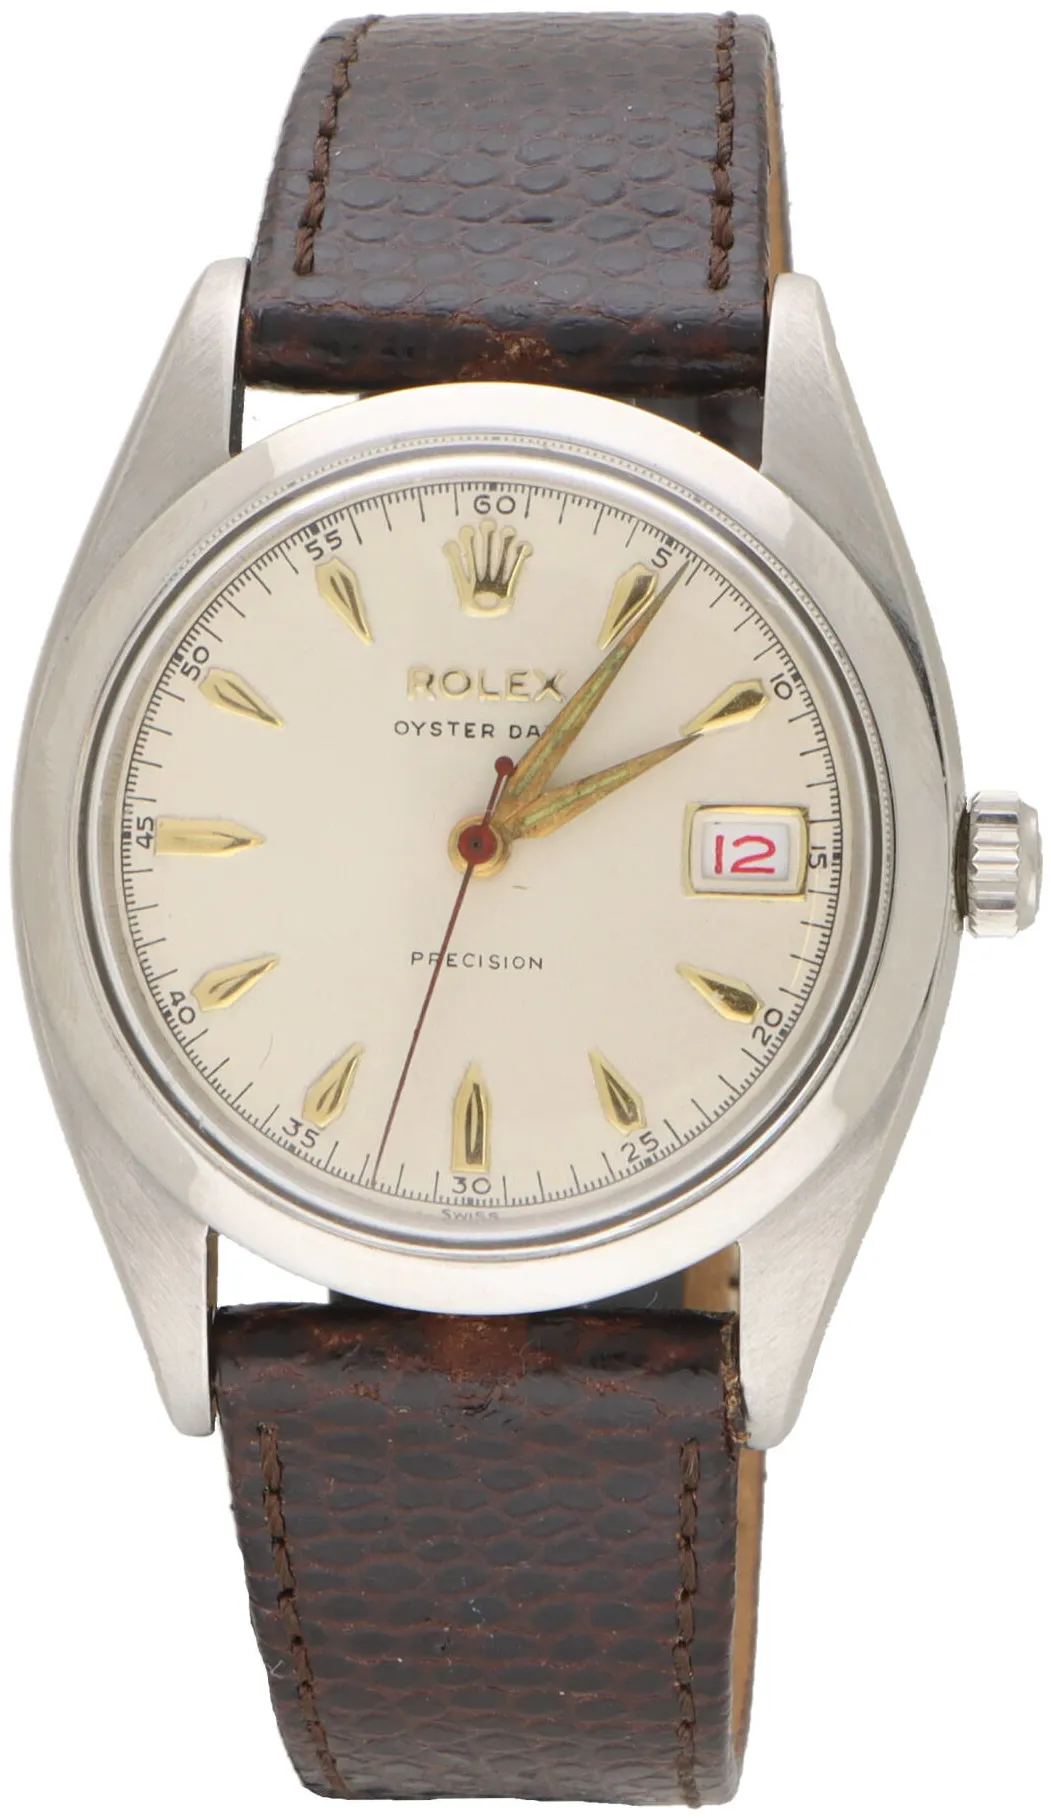 Rolex Oyster Date 6569 34mm Stainless steel White